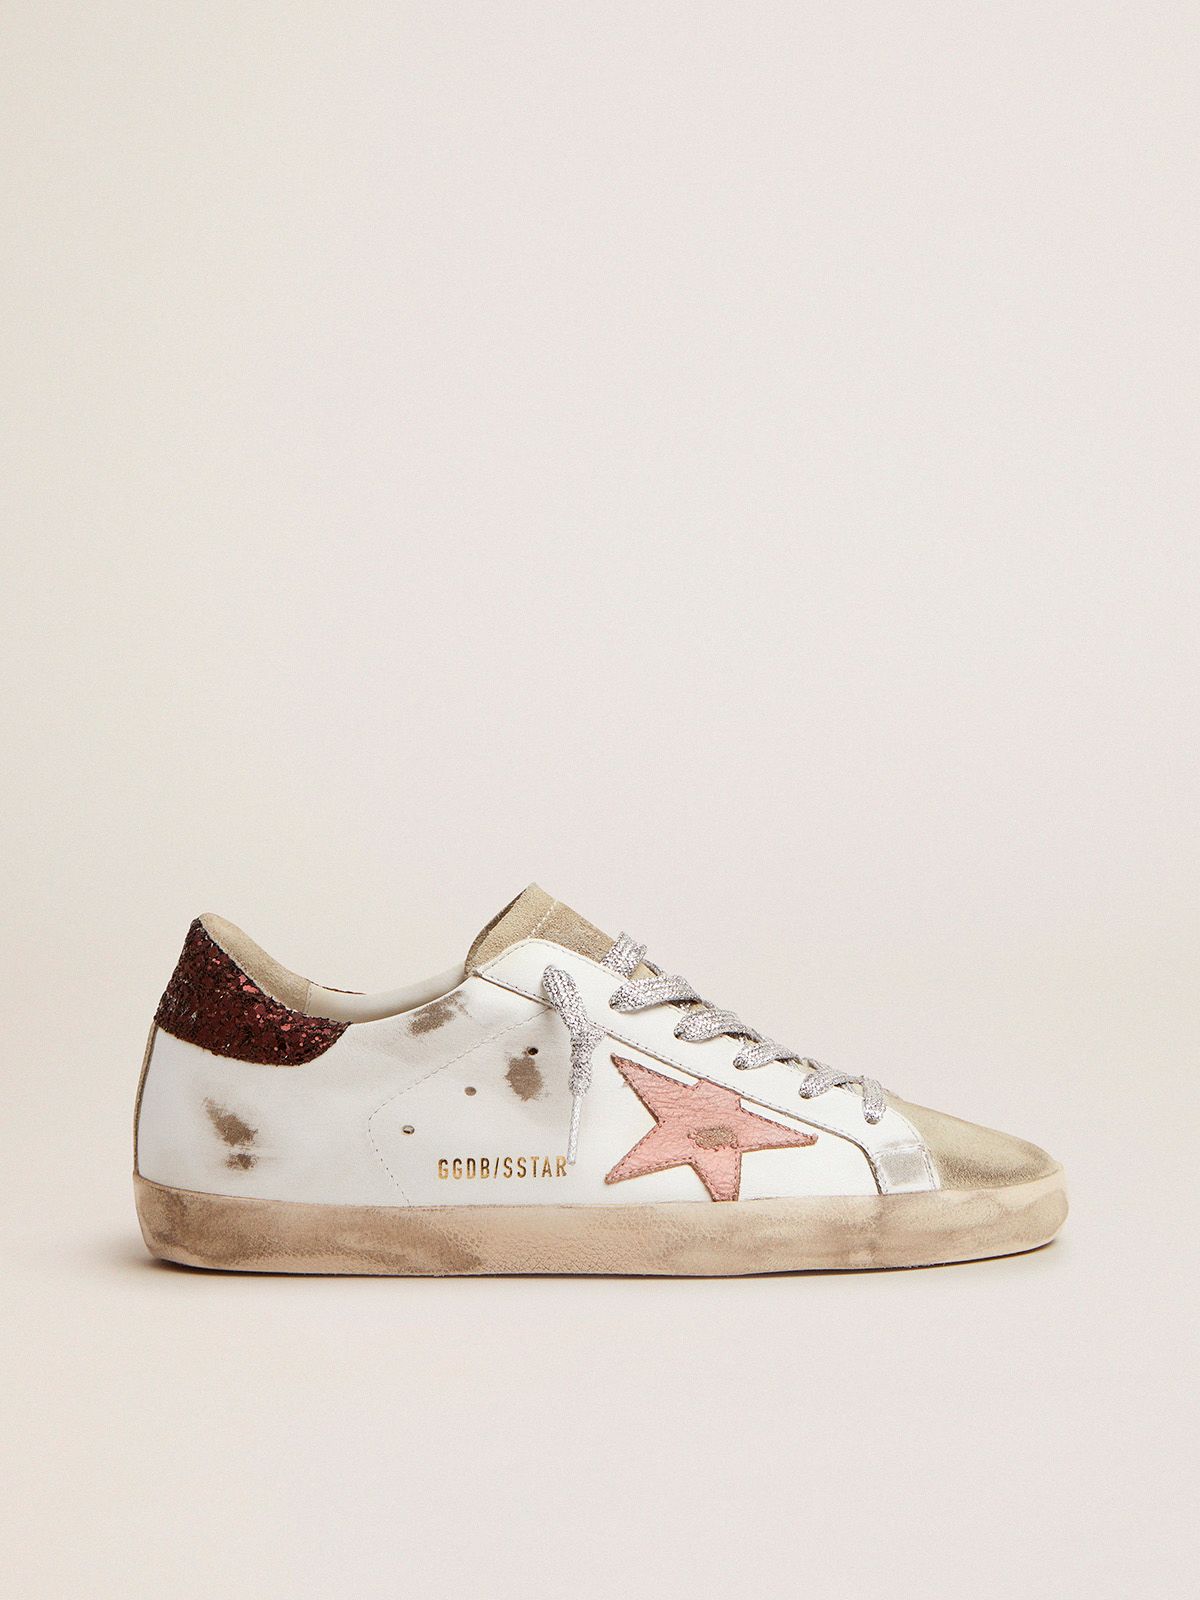 Super-Star sneakers with brown glitter heel tab and pink crackled leather star